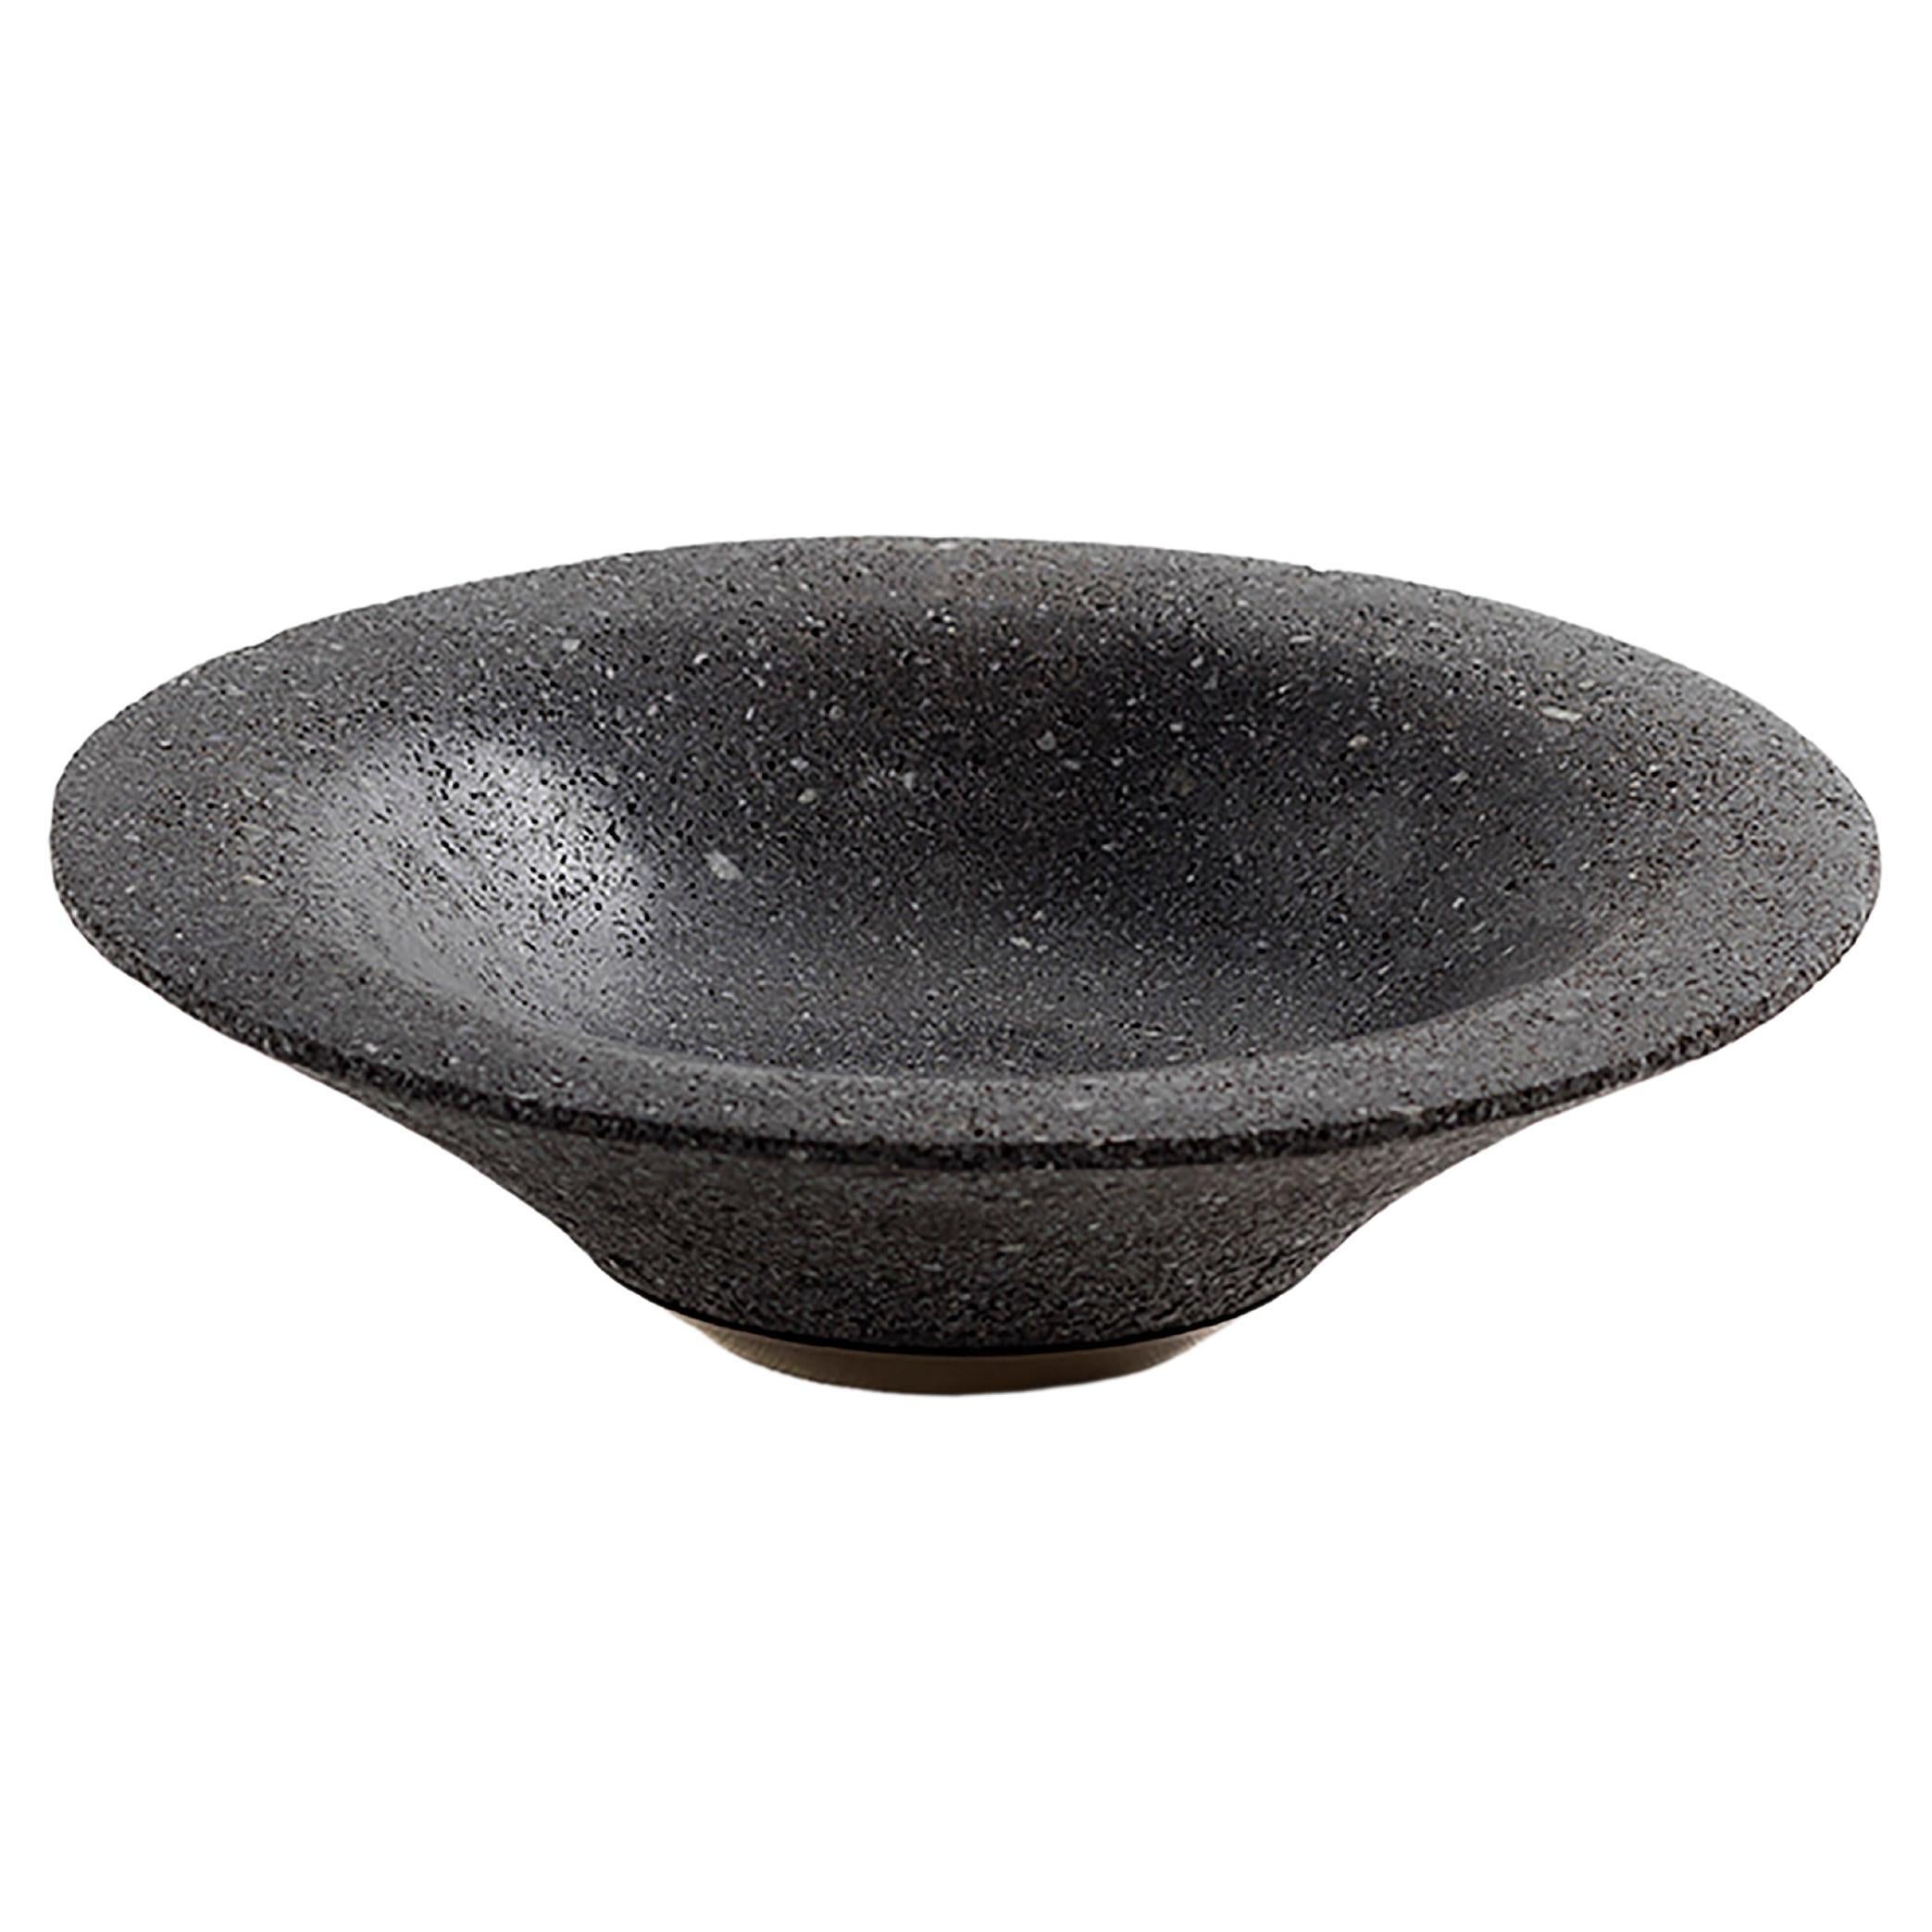 CHIMBORAZO Decorative Volcanic Stone Bowl with Bronze Detail by ANDEAN, In Stock